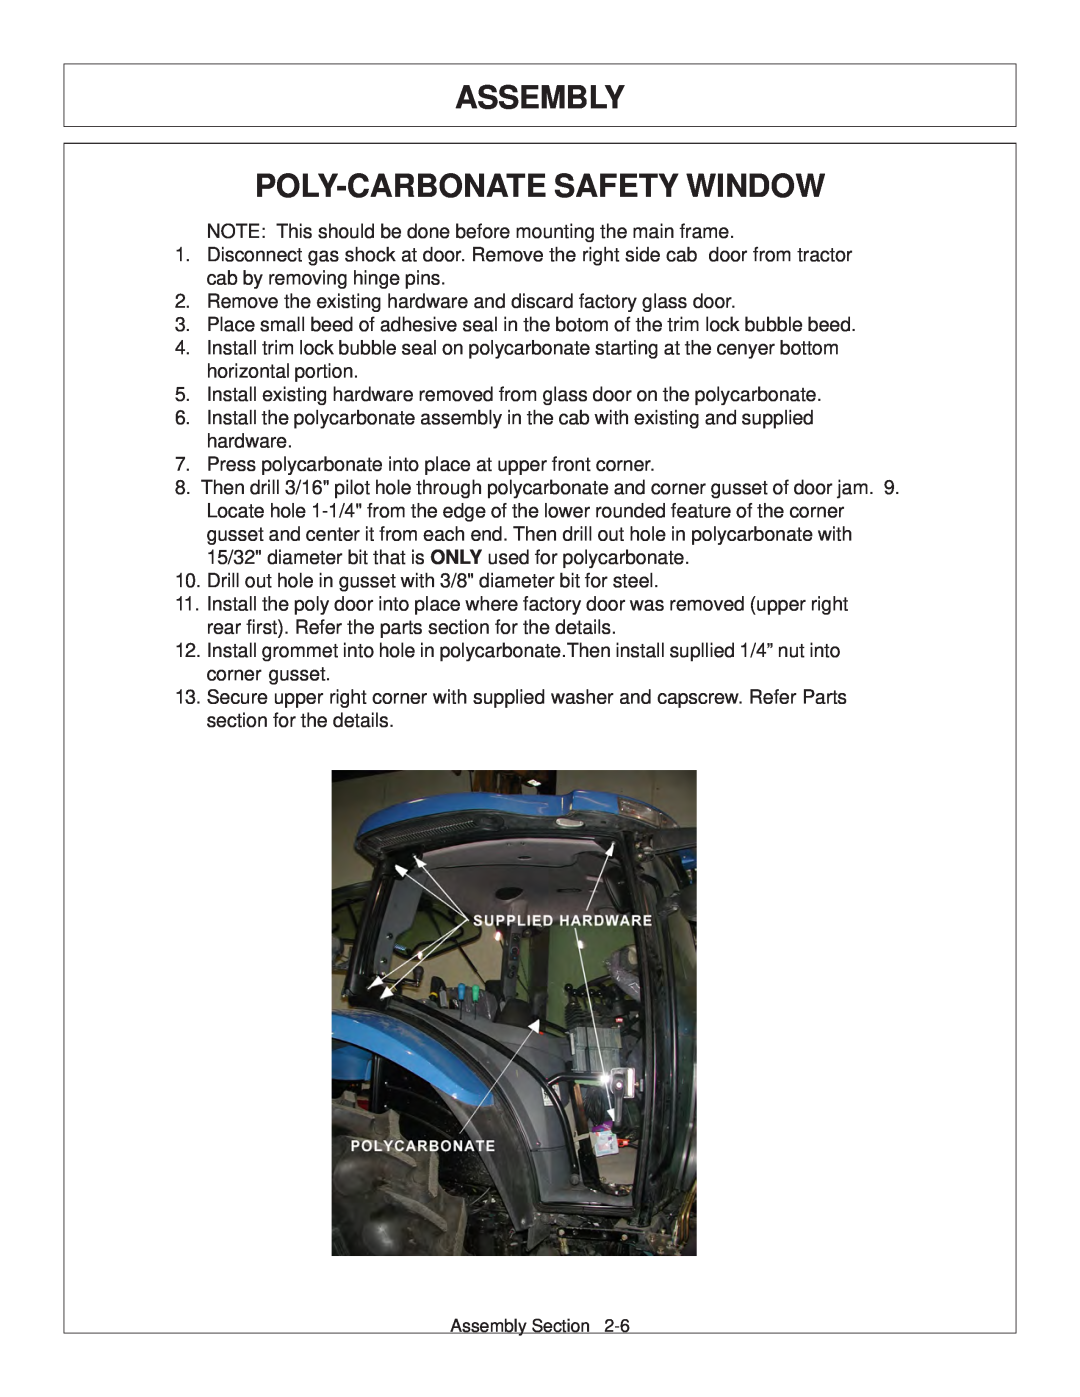 Tiger Products Co., Ltd TS 100A manual Assembly Poly-Carbonate Safety Window 